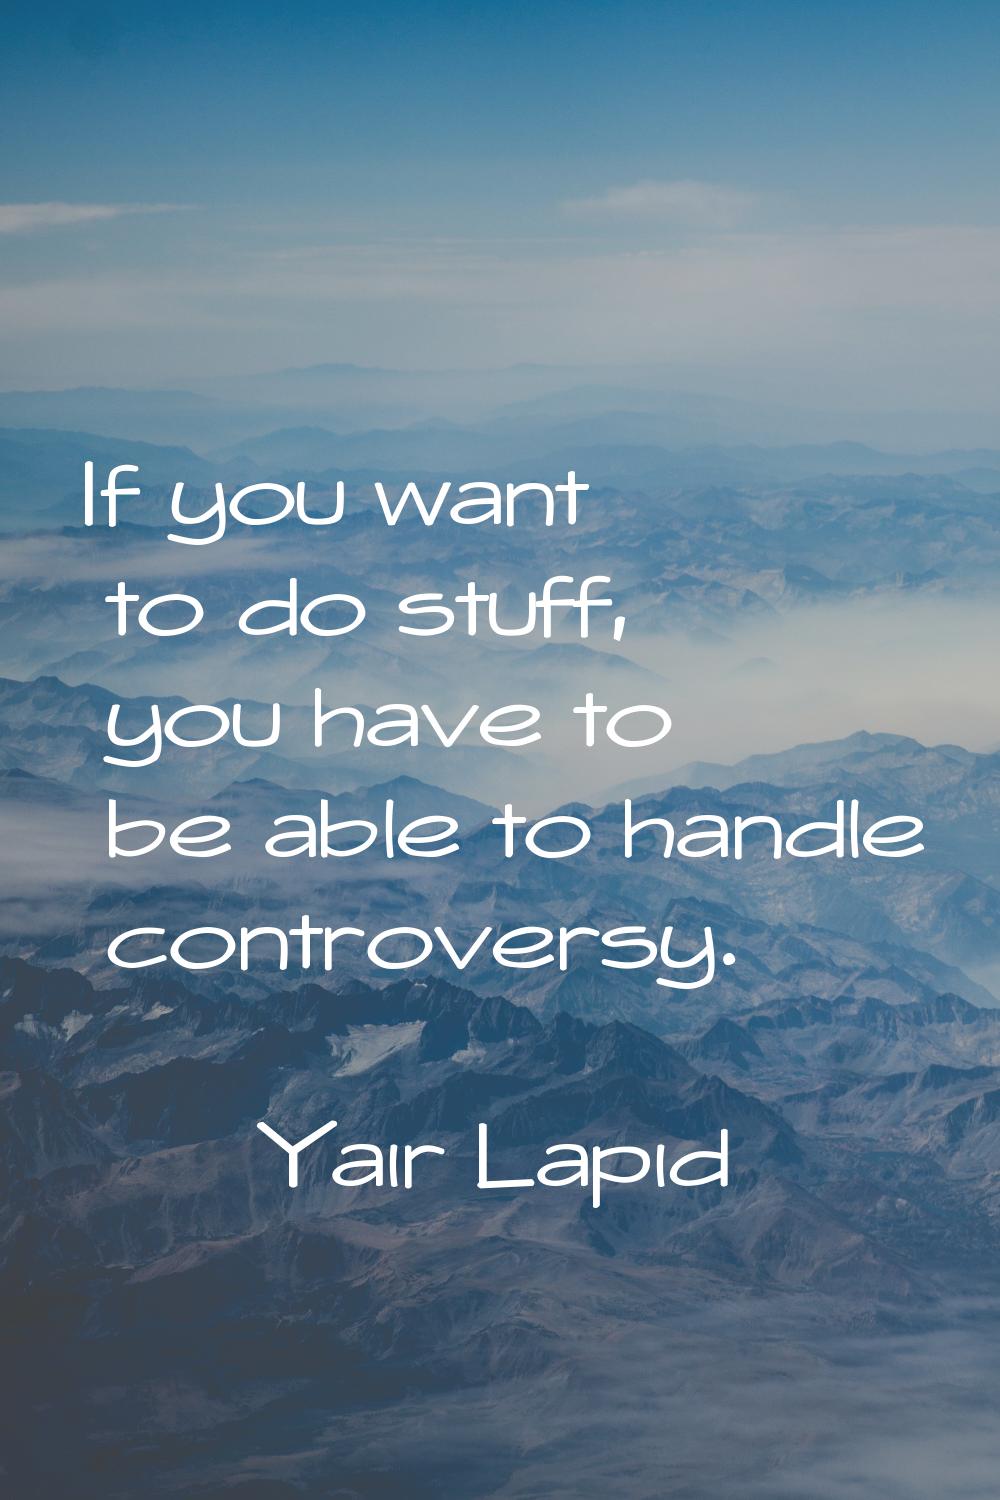 If you want to do stuff, you have to be able to handle controversy.